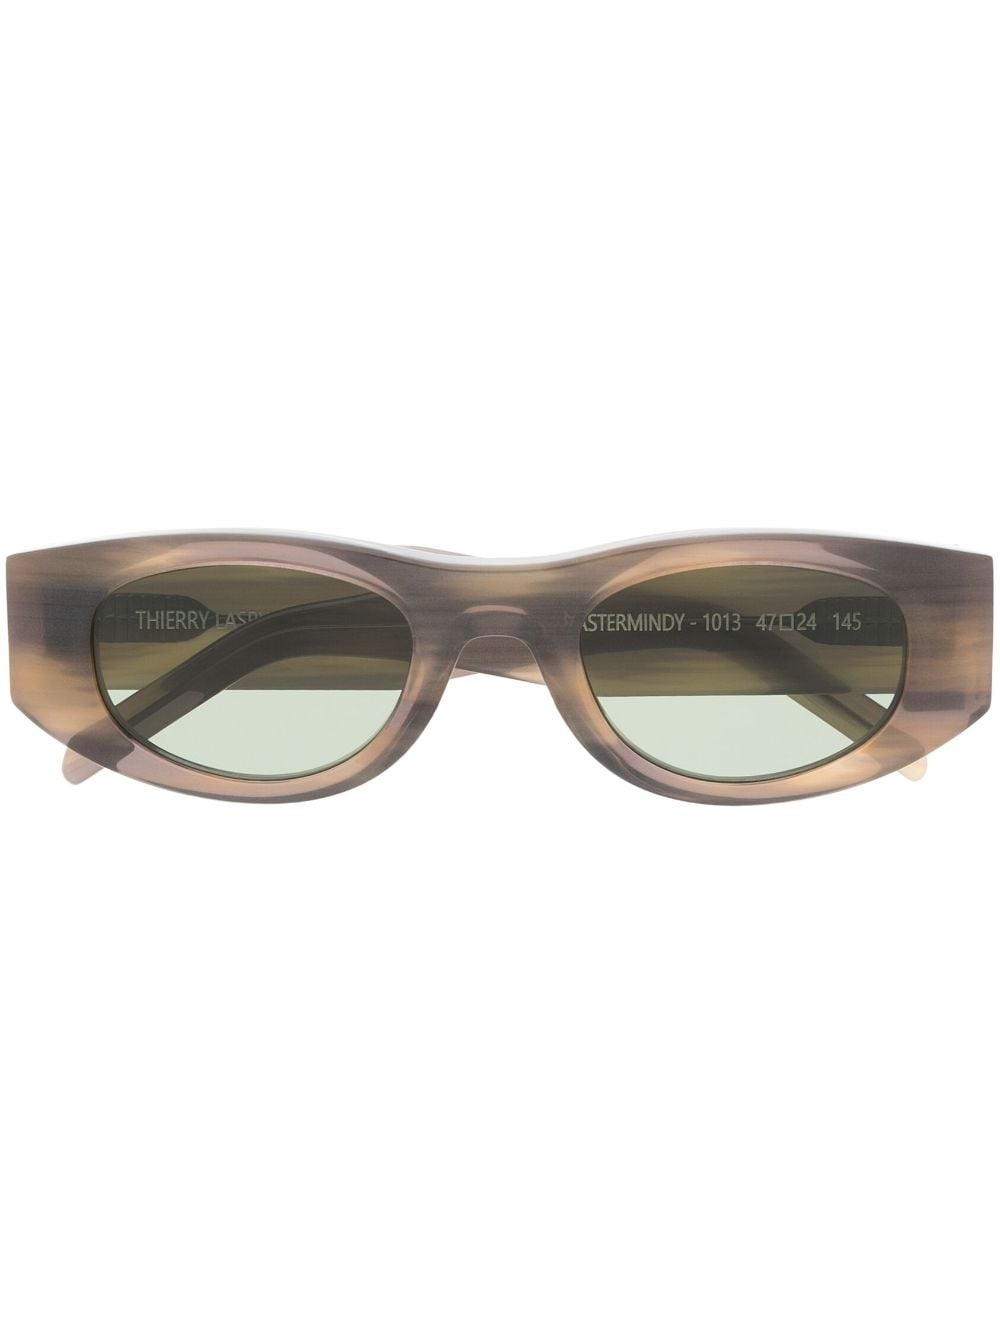 Thierry Lasry Mastermindy oval-frame sunglasses - Green von Thierry Lasry